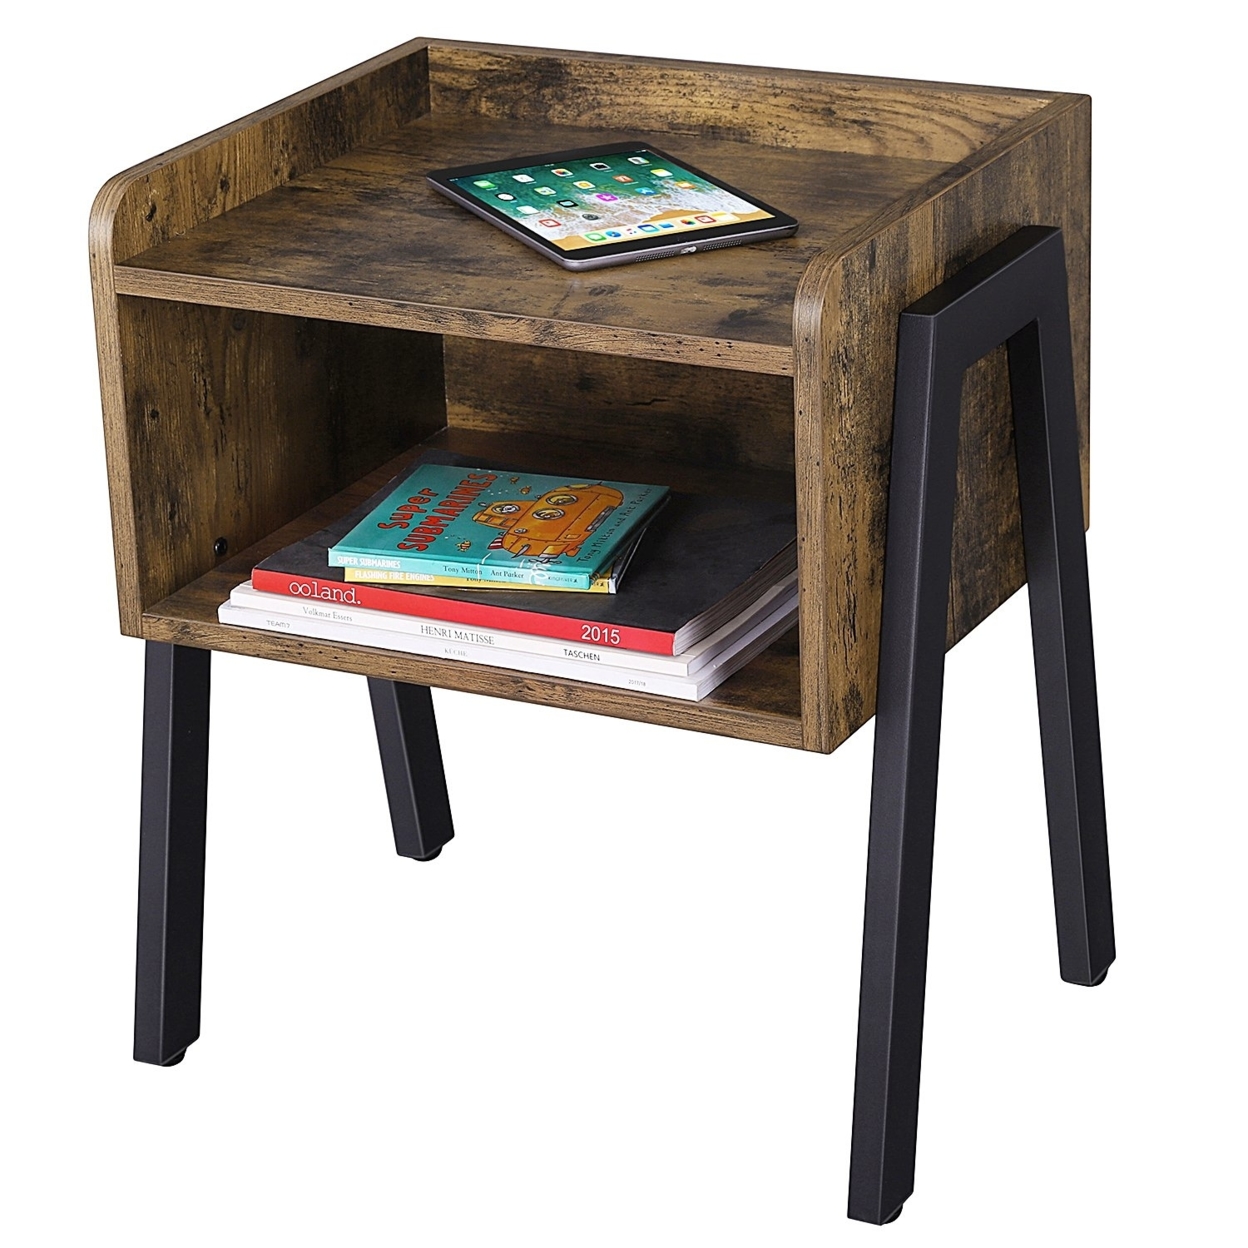 Wooden Stackable End Table With Inverted Iron Legs And Storage Compartment, Brown And Black- Saltoro Sherpi